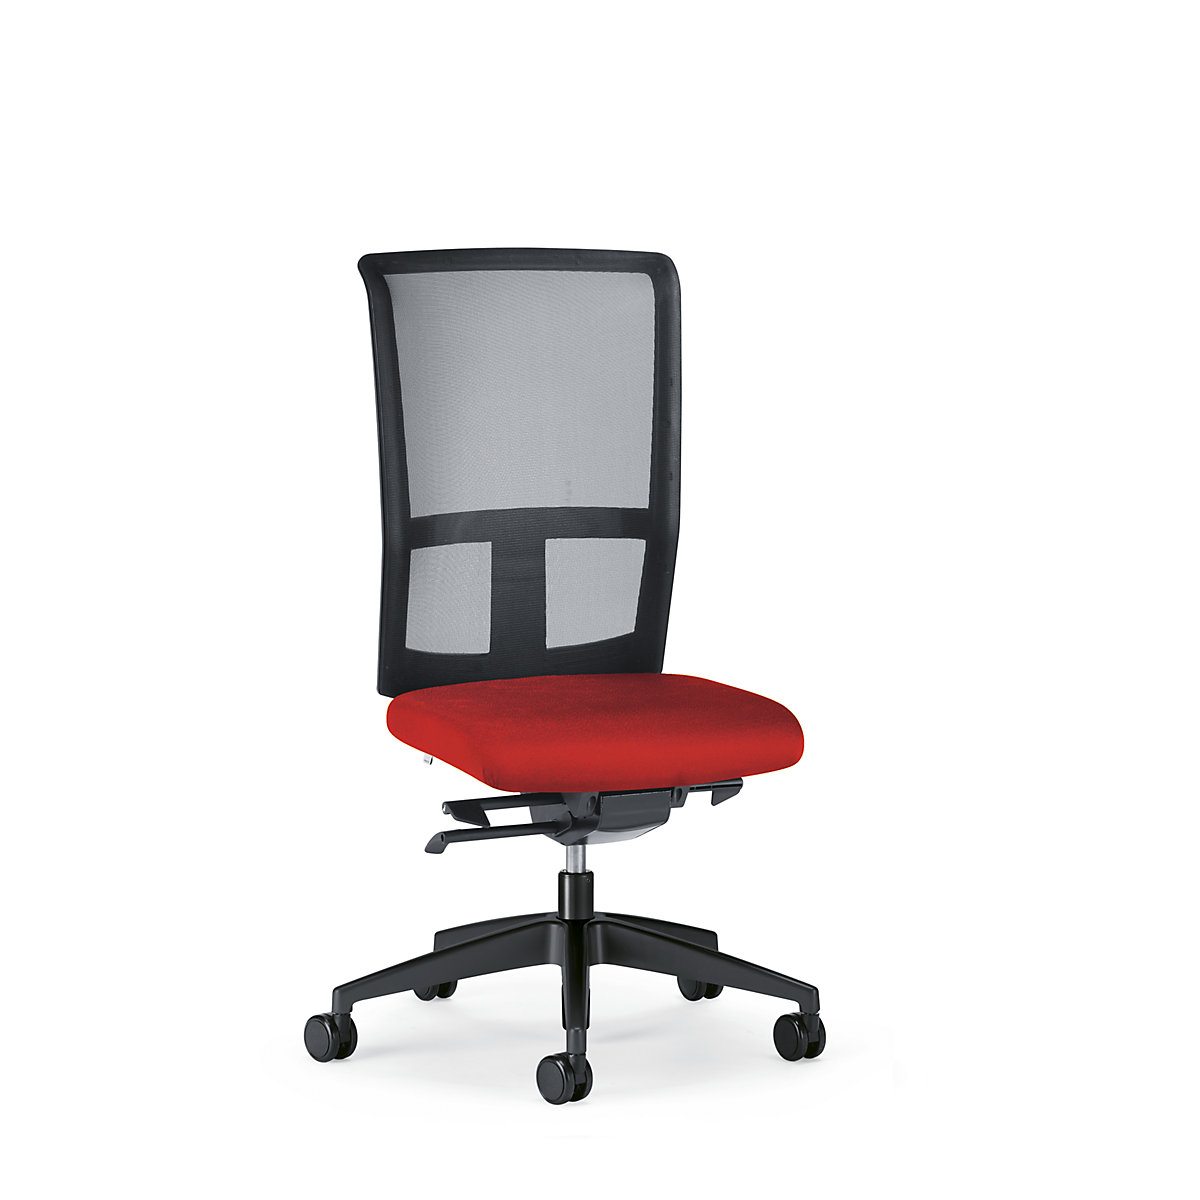 GOAL AIR office swivel chair, back rest height 545 mm – interstuhl, black frame, with soft castors, flame red, seat depth 410 mm-1